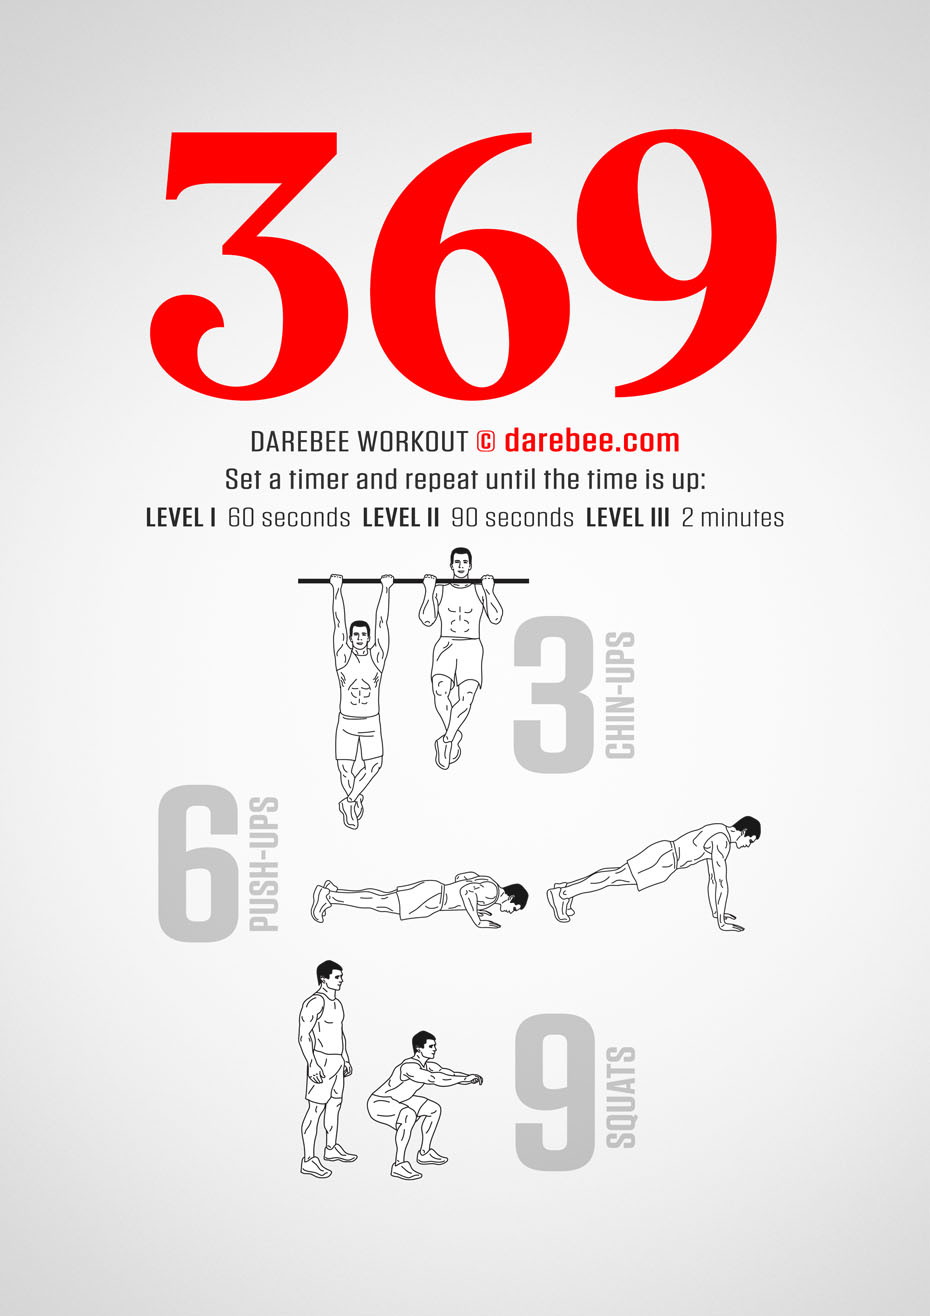 369 is a Darebee home fitness total body strength workout that helps you become functionally stronger and fitter.